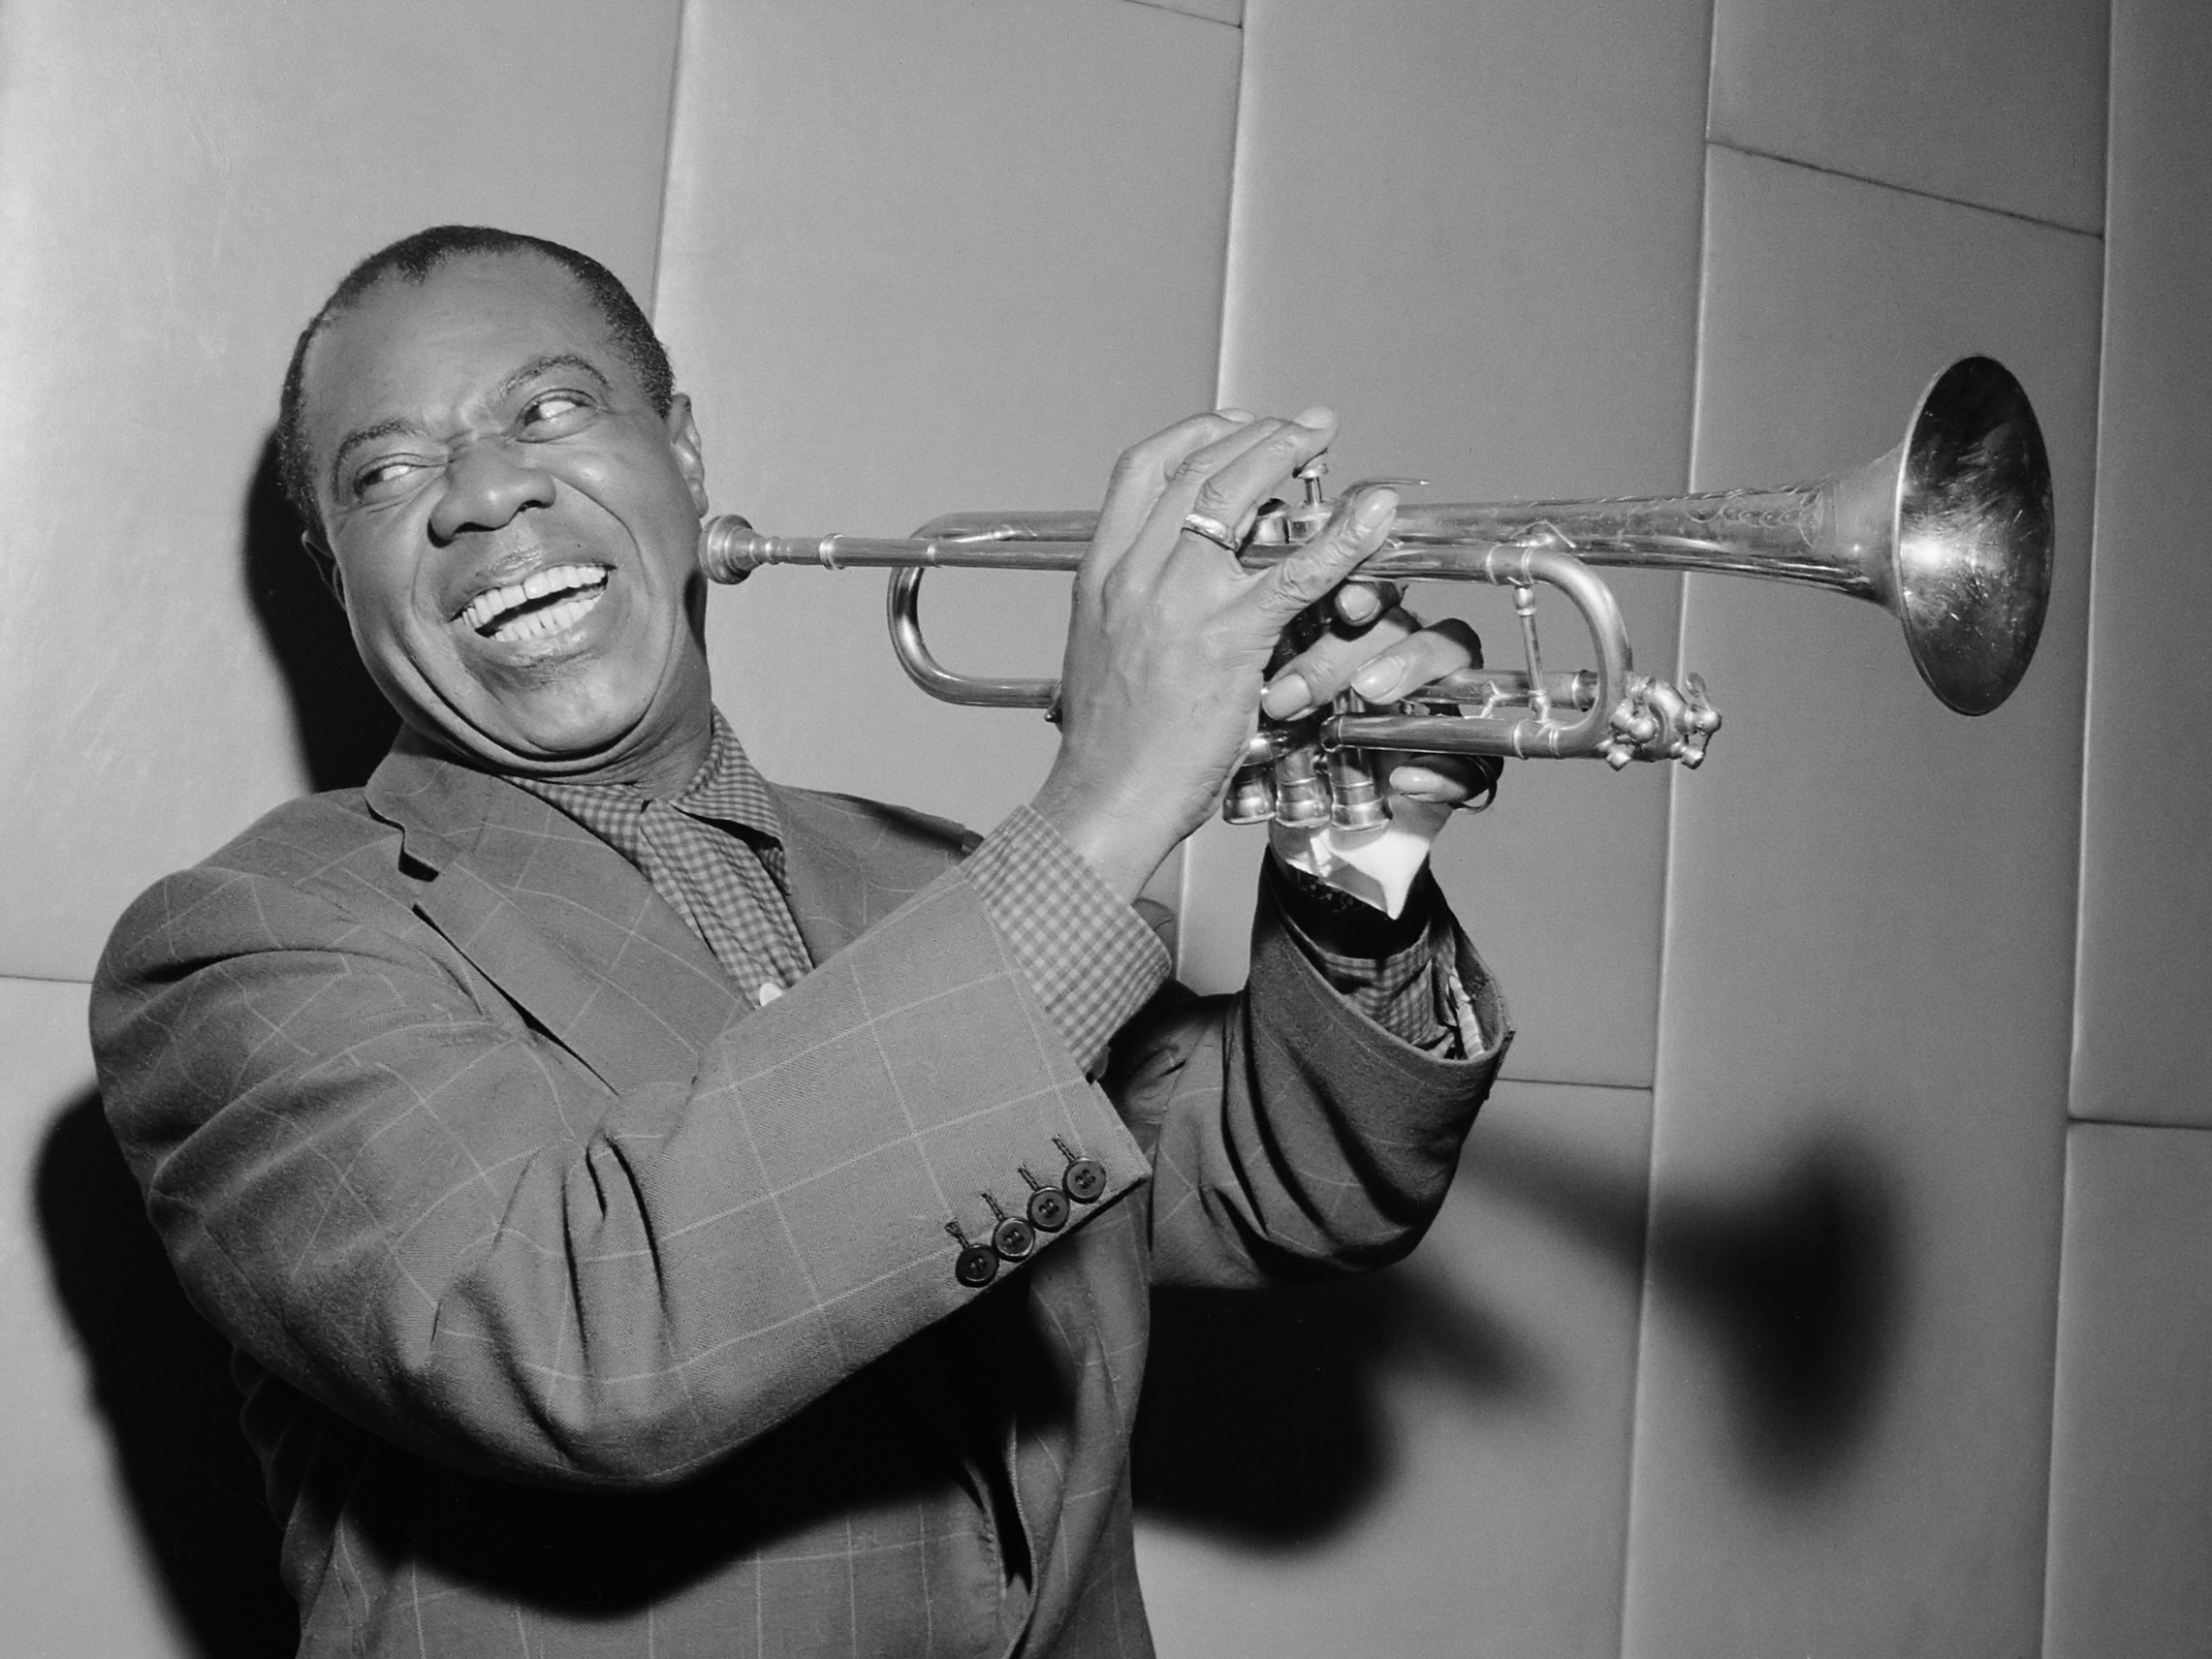 Download wallpaper 2282x1712 louie armstrong, jazz, pipe, bw HD